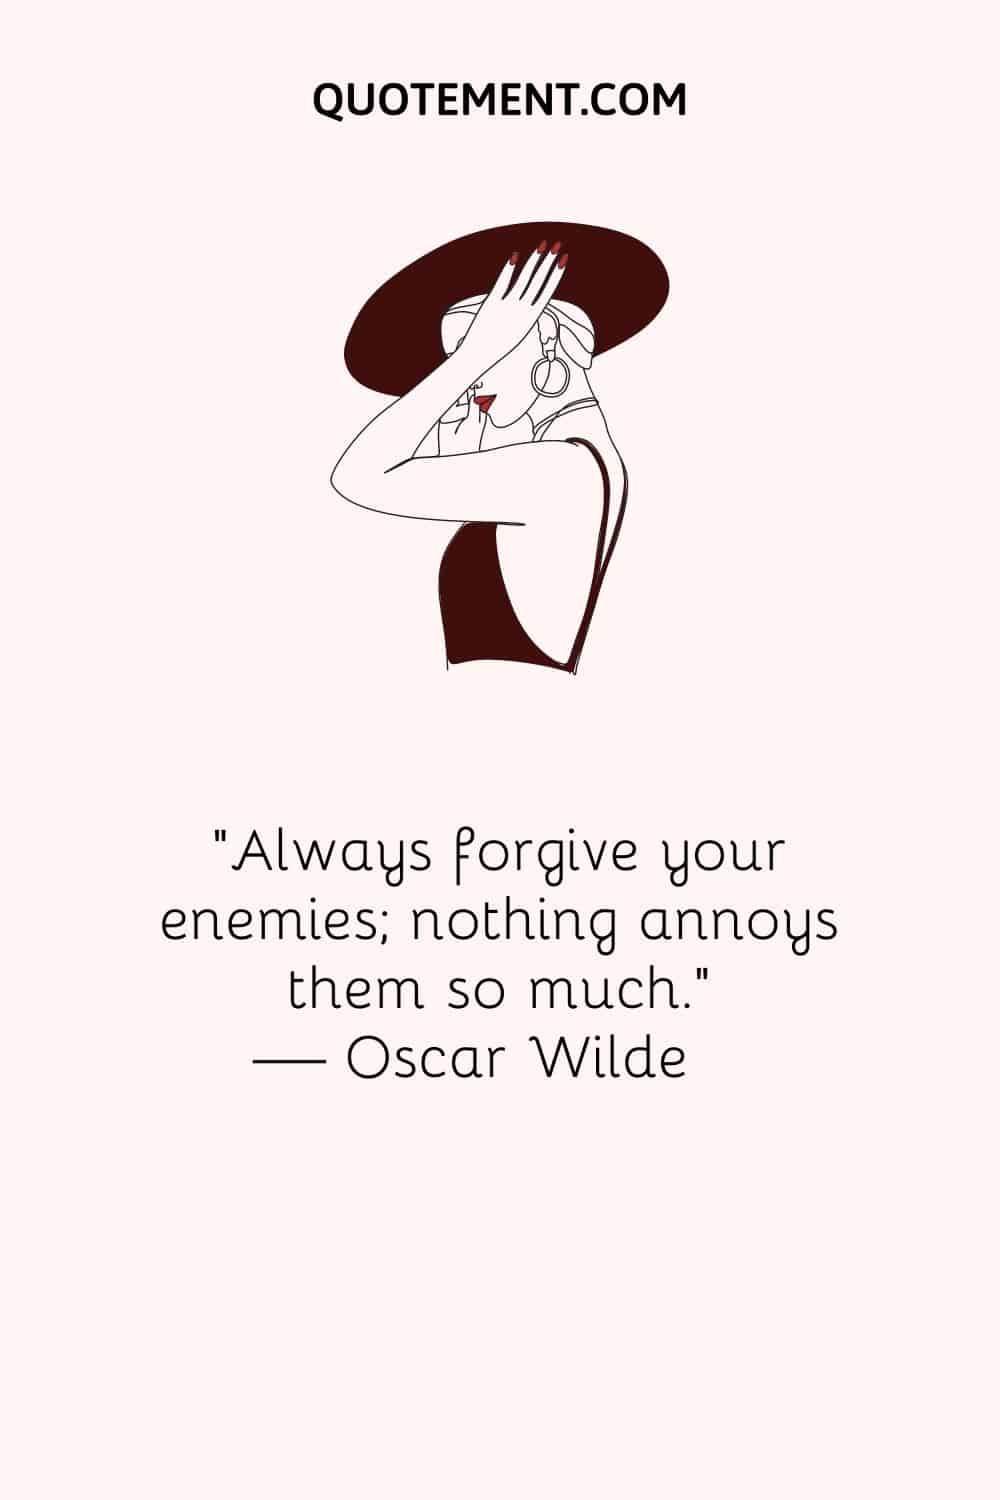 “Always forgive your enemies; nothing annoys them so much.” — Oscar Wilde